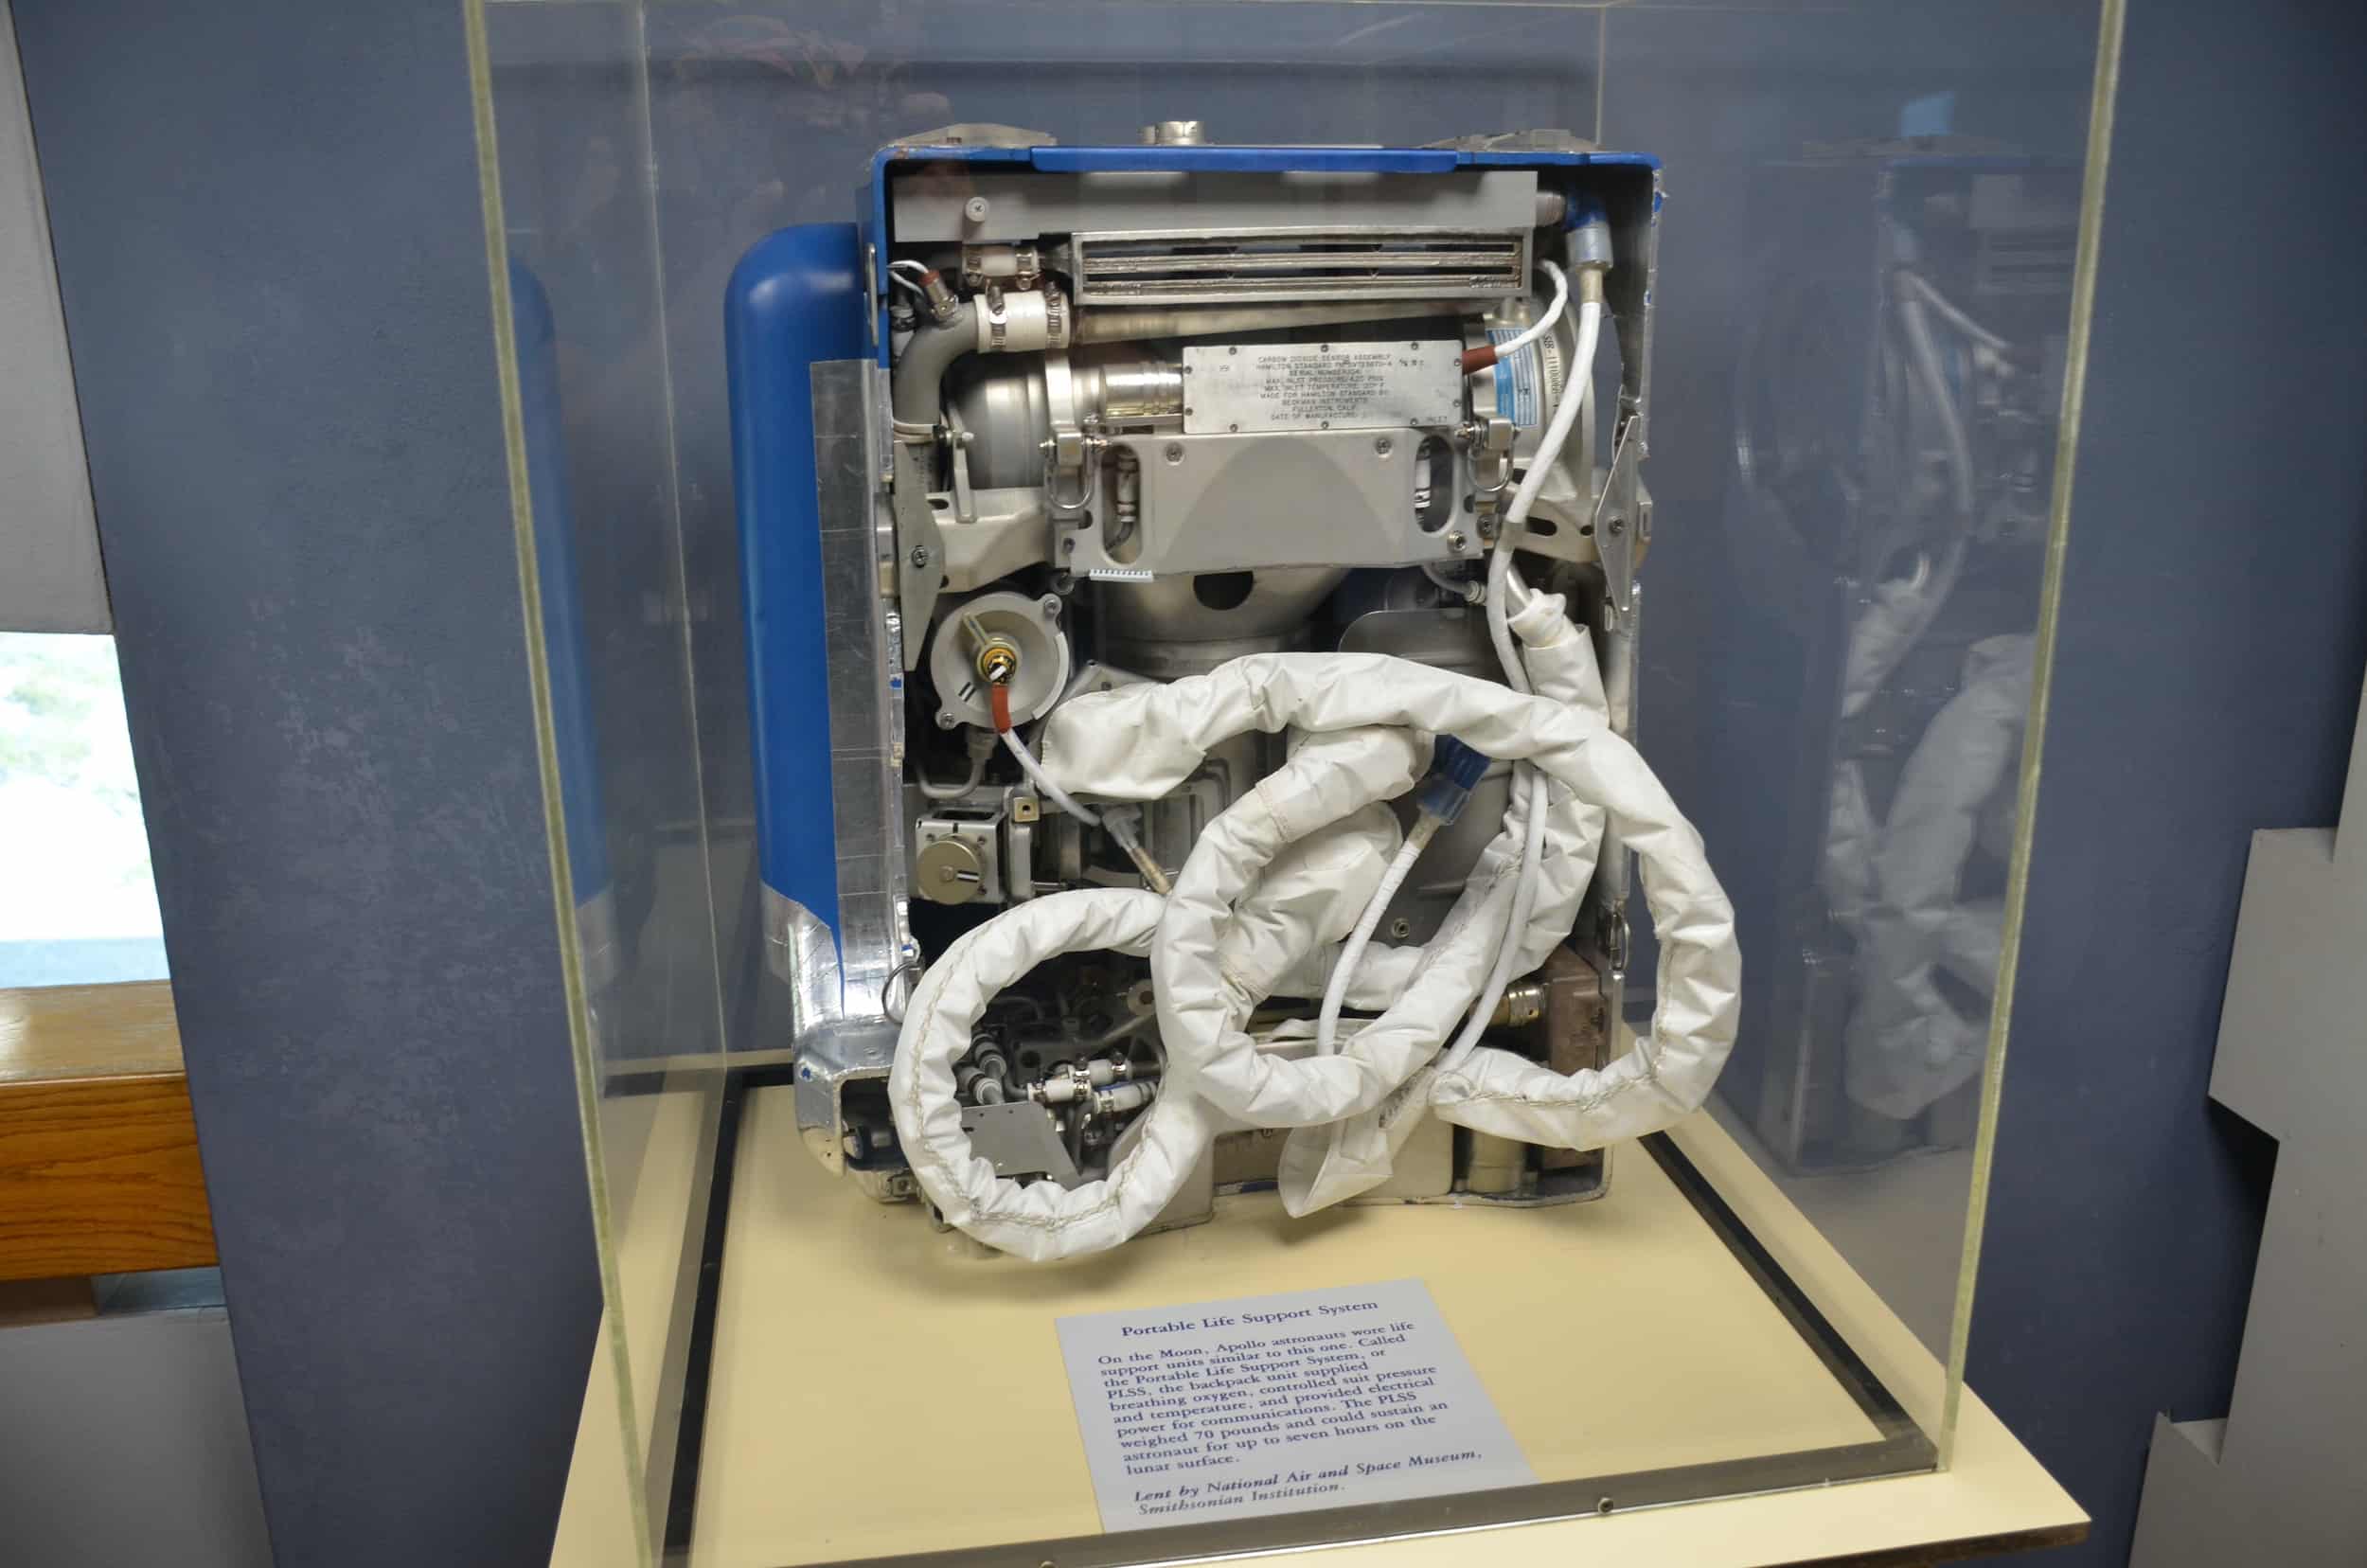 Portable life support system at the New Mexico Museum of Space History in Alamogordo, New Mexico